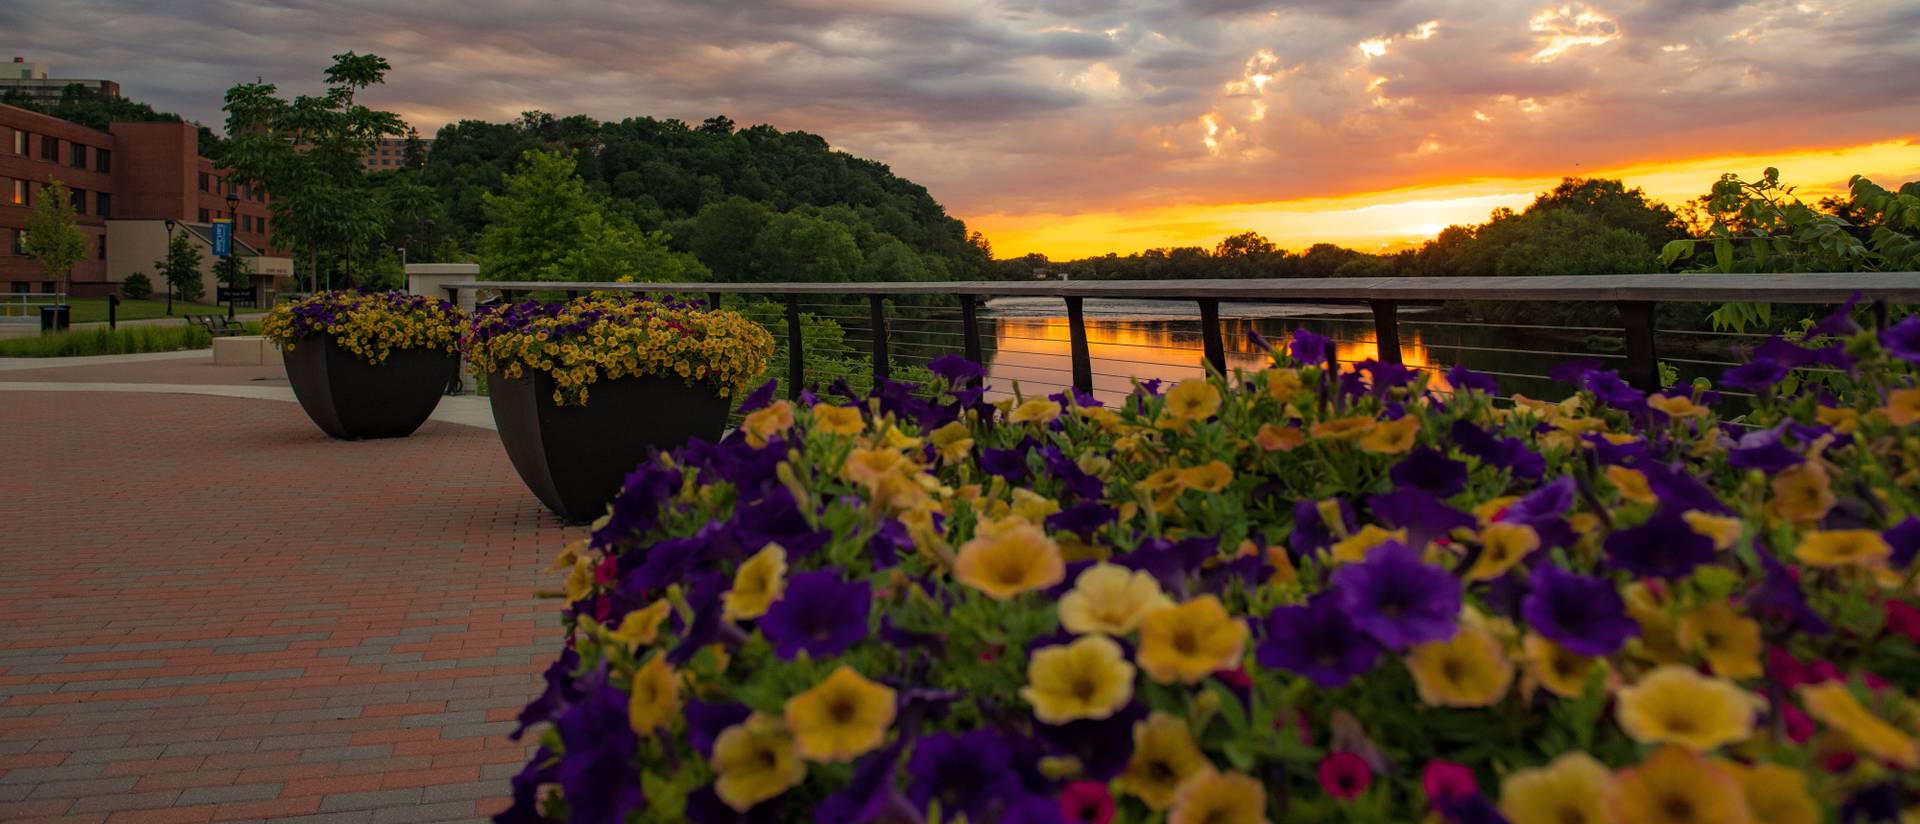 flowers and sunset by Chippewa River